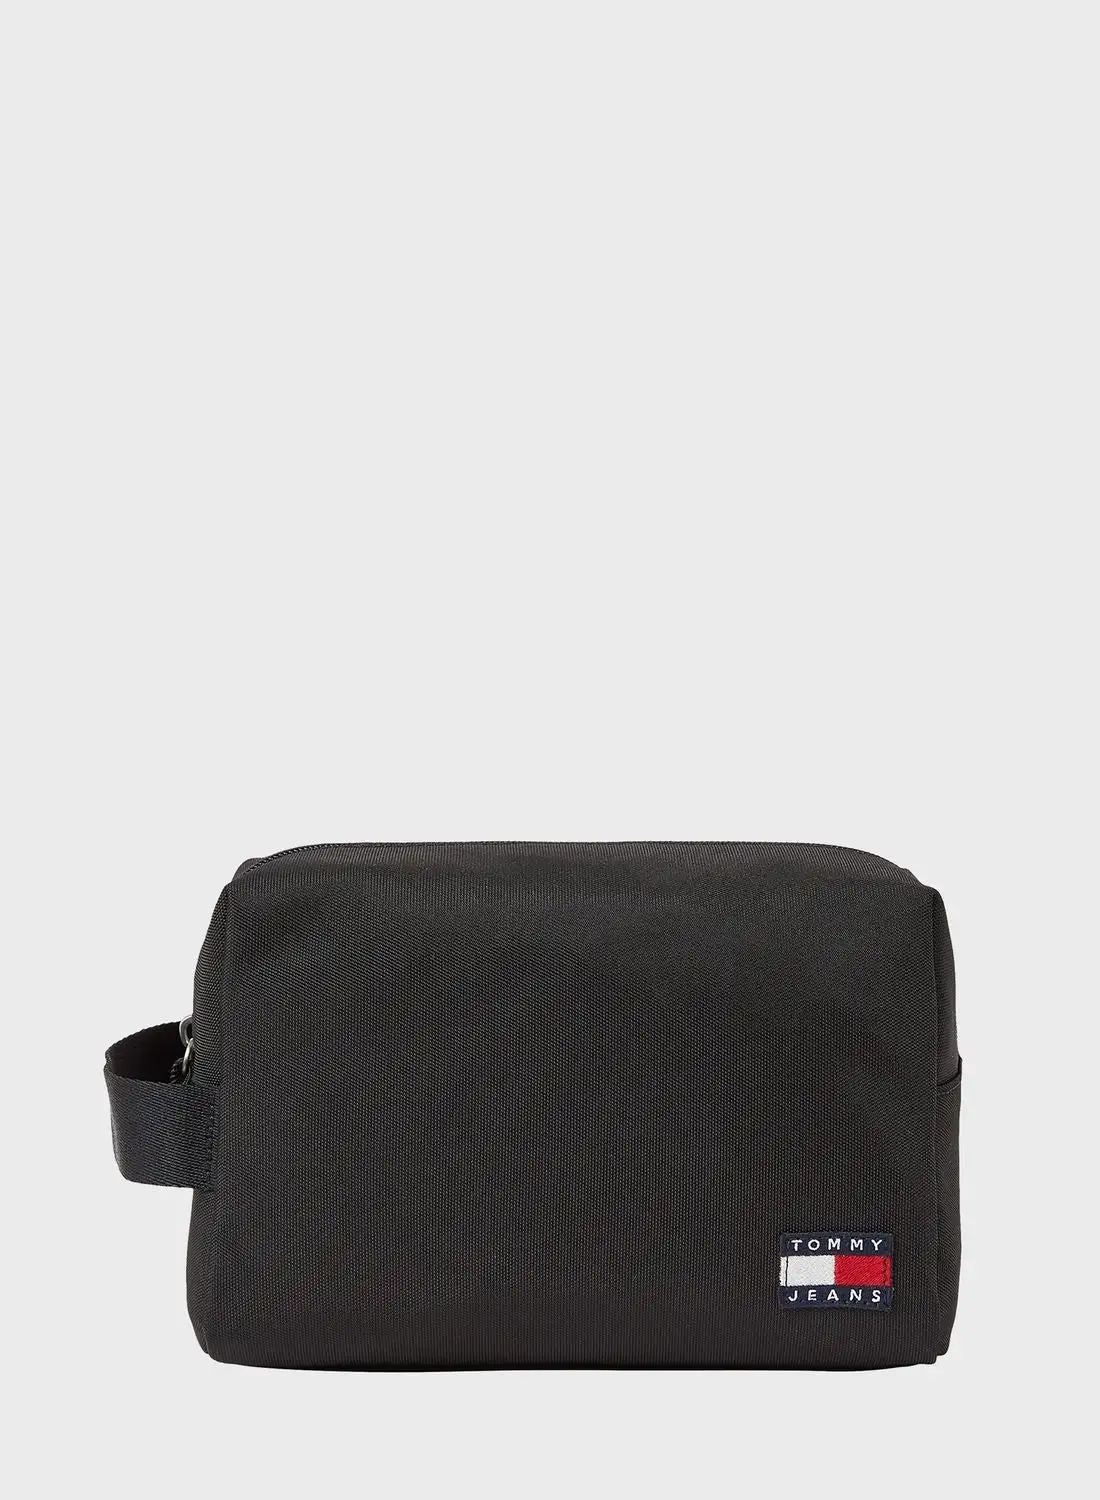 TOMMY JEANS Logo Toiletry Bag